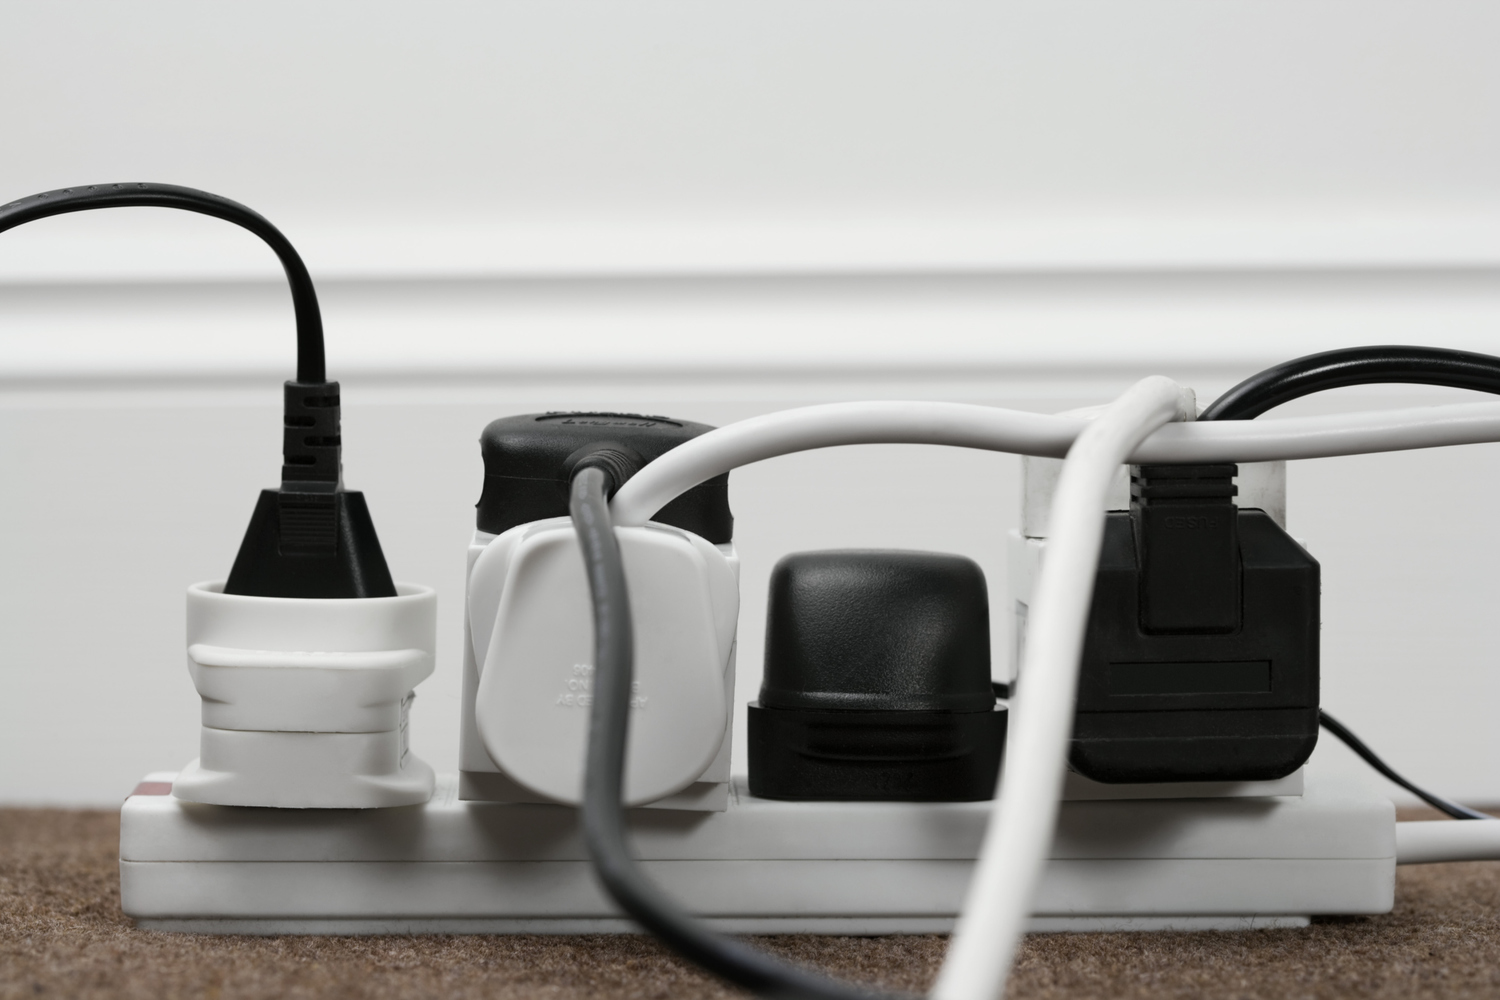 Electrical power strip and plugs